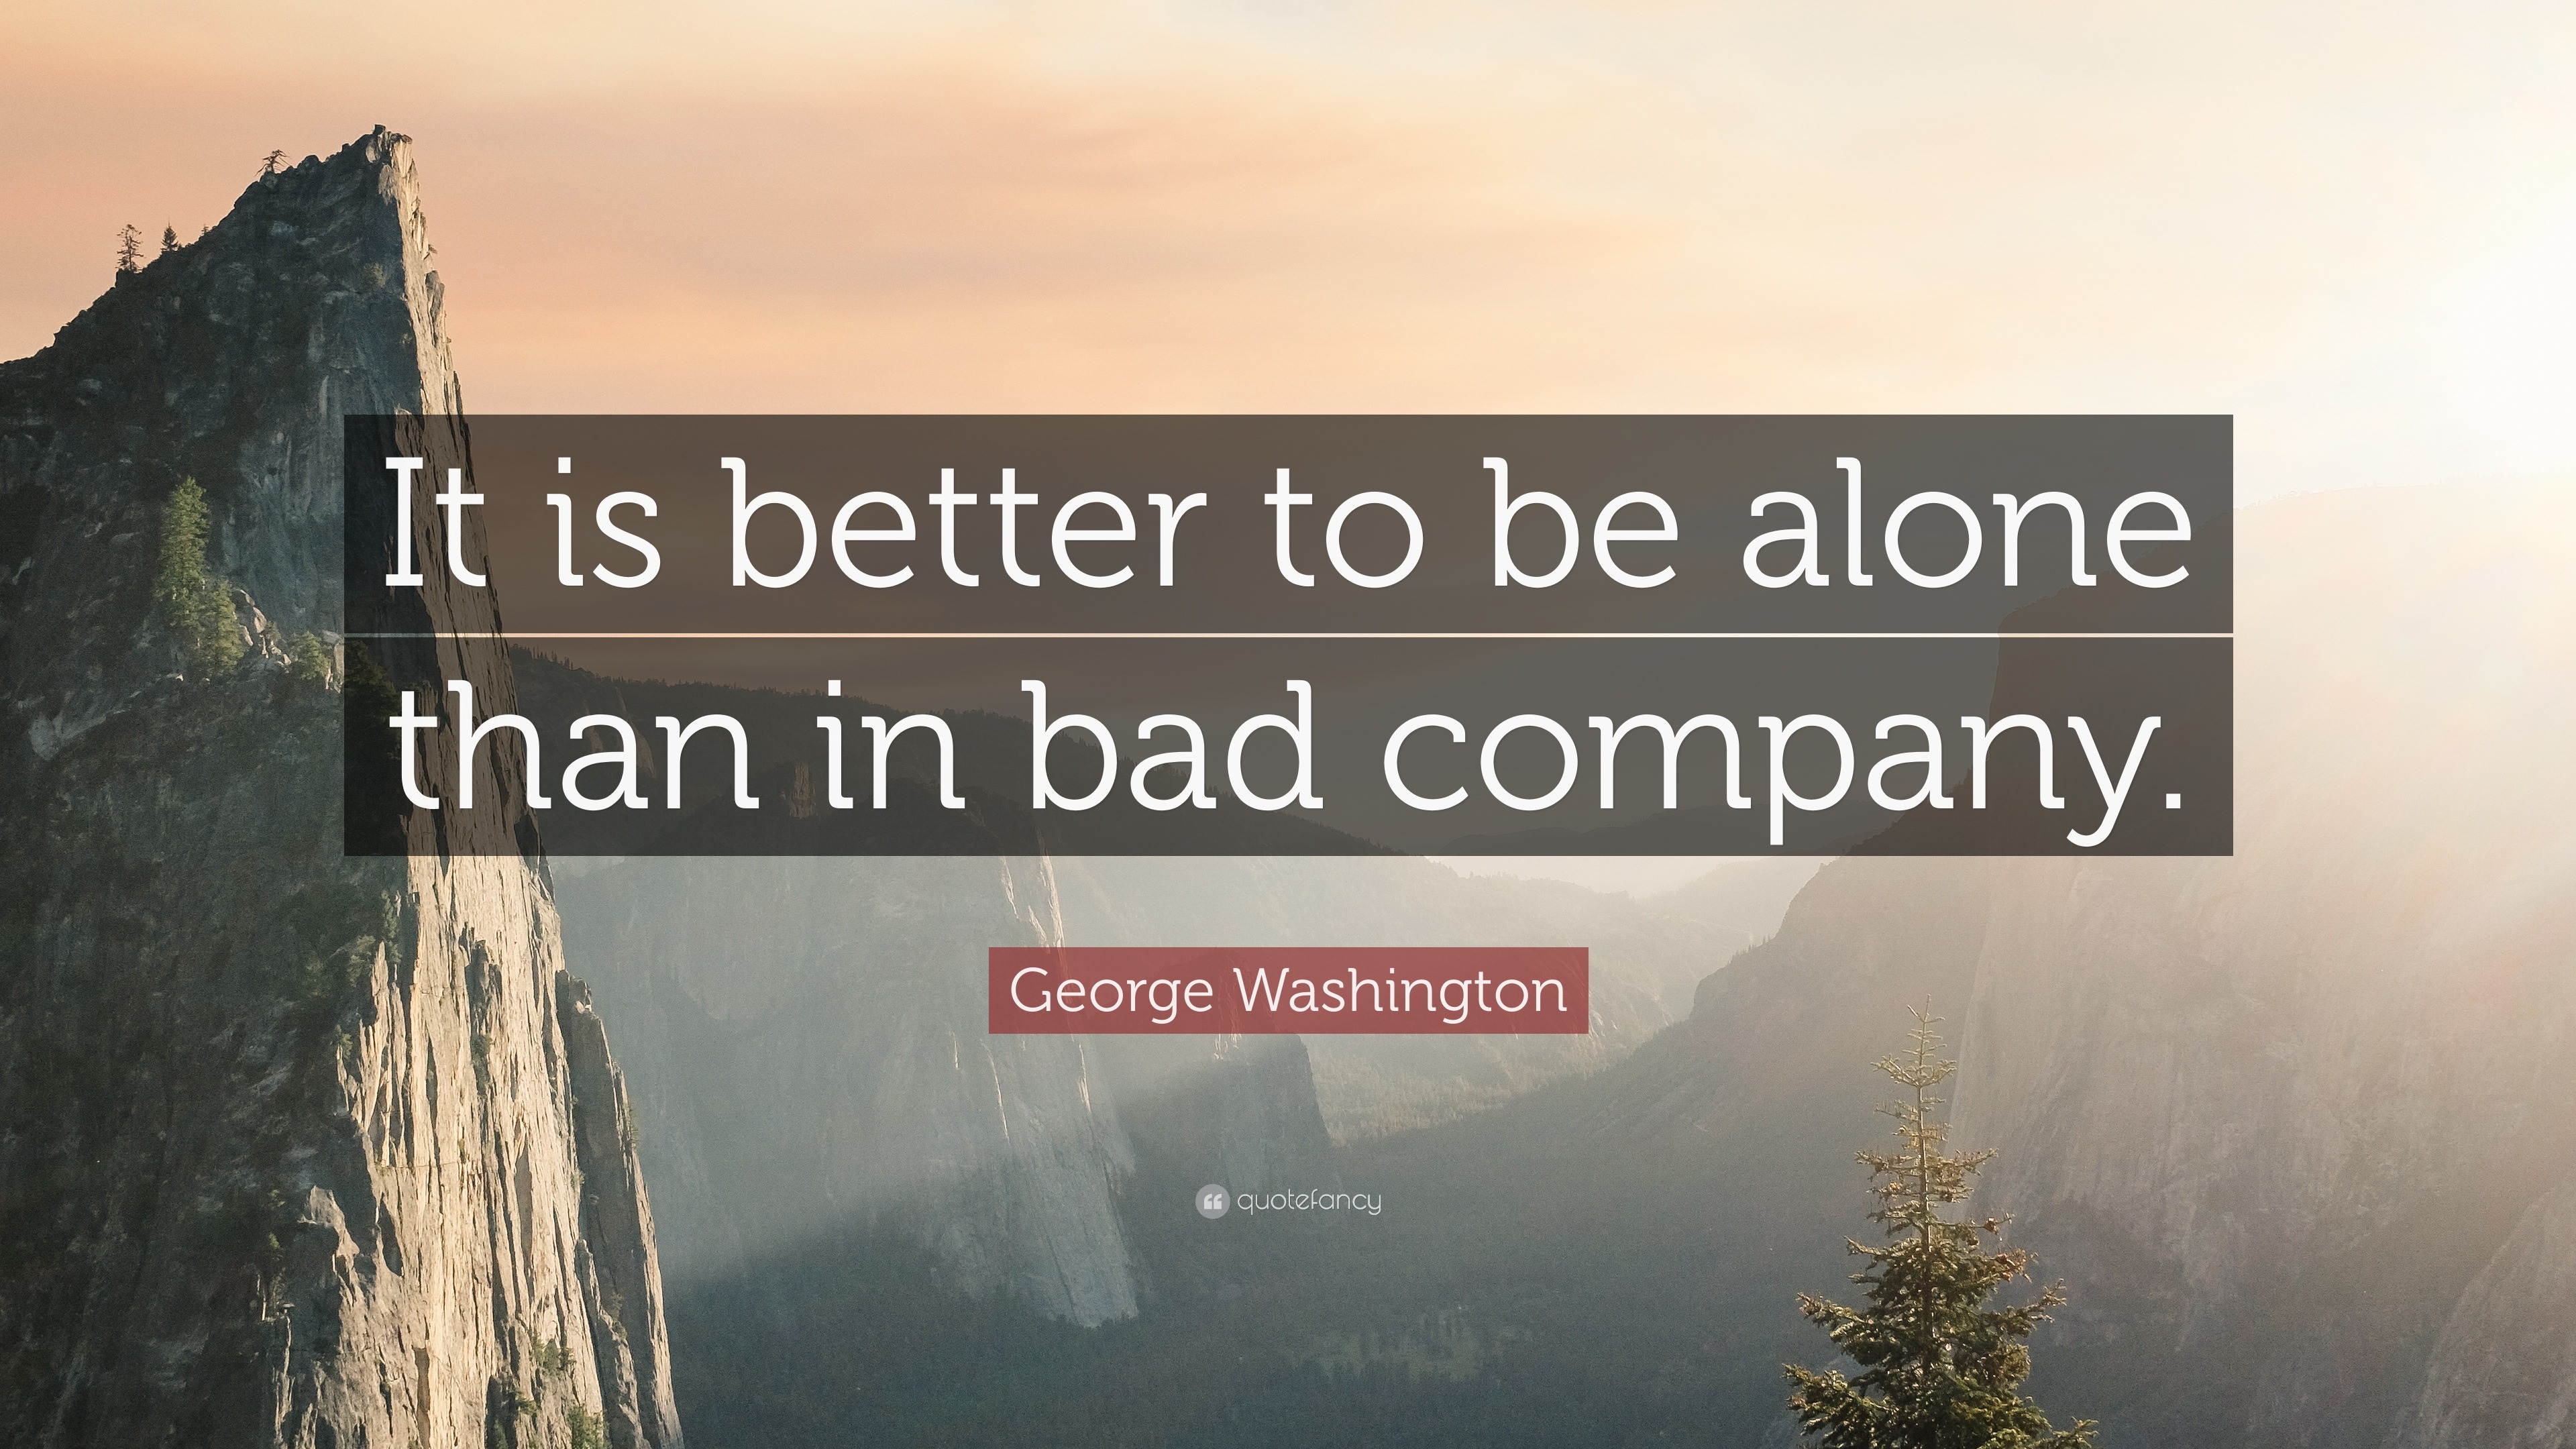 George Washington Quote: “It is better to be alone than in bad company